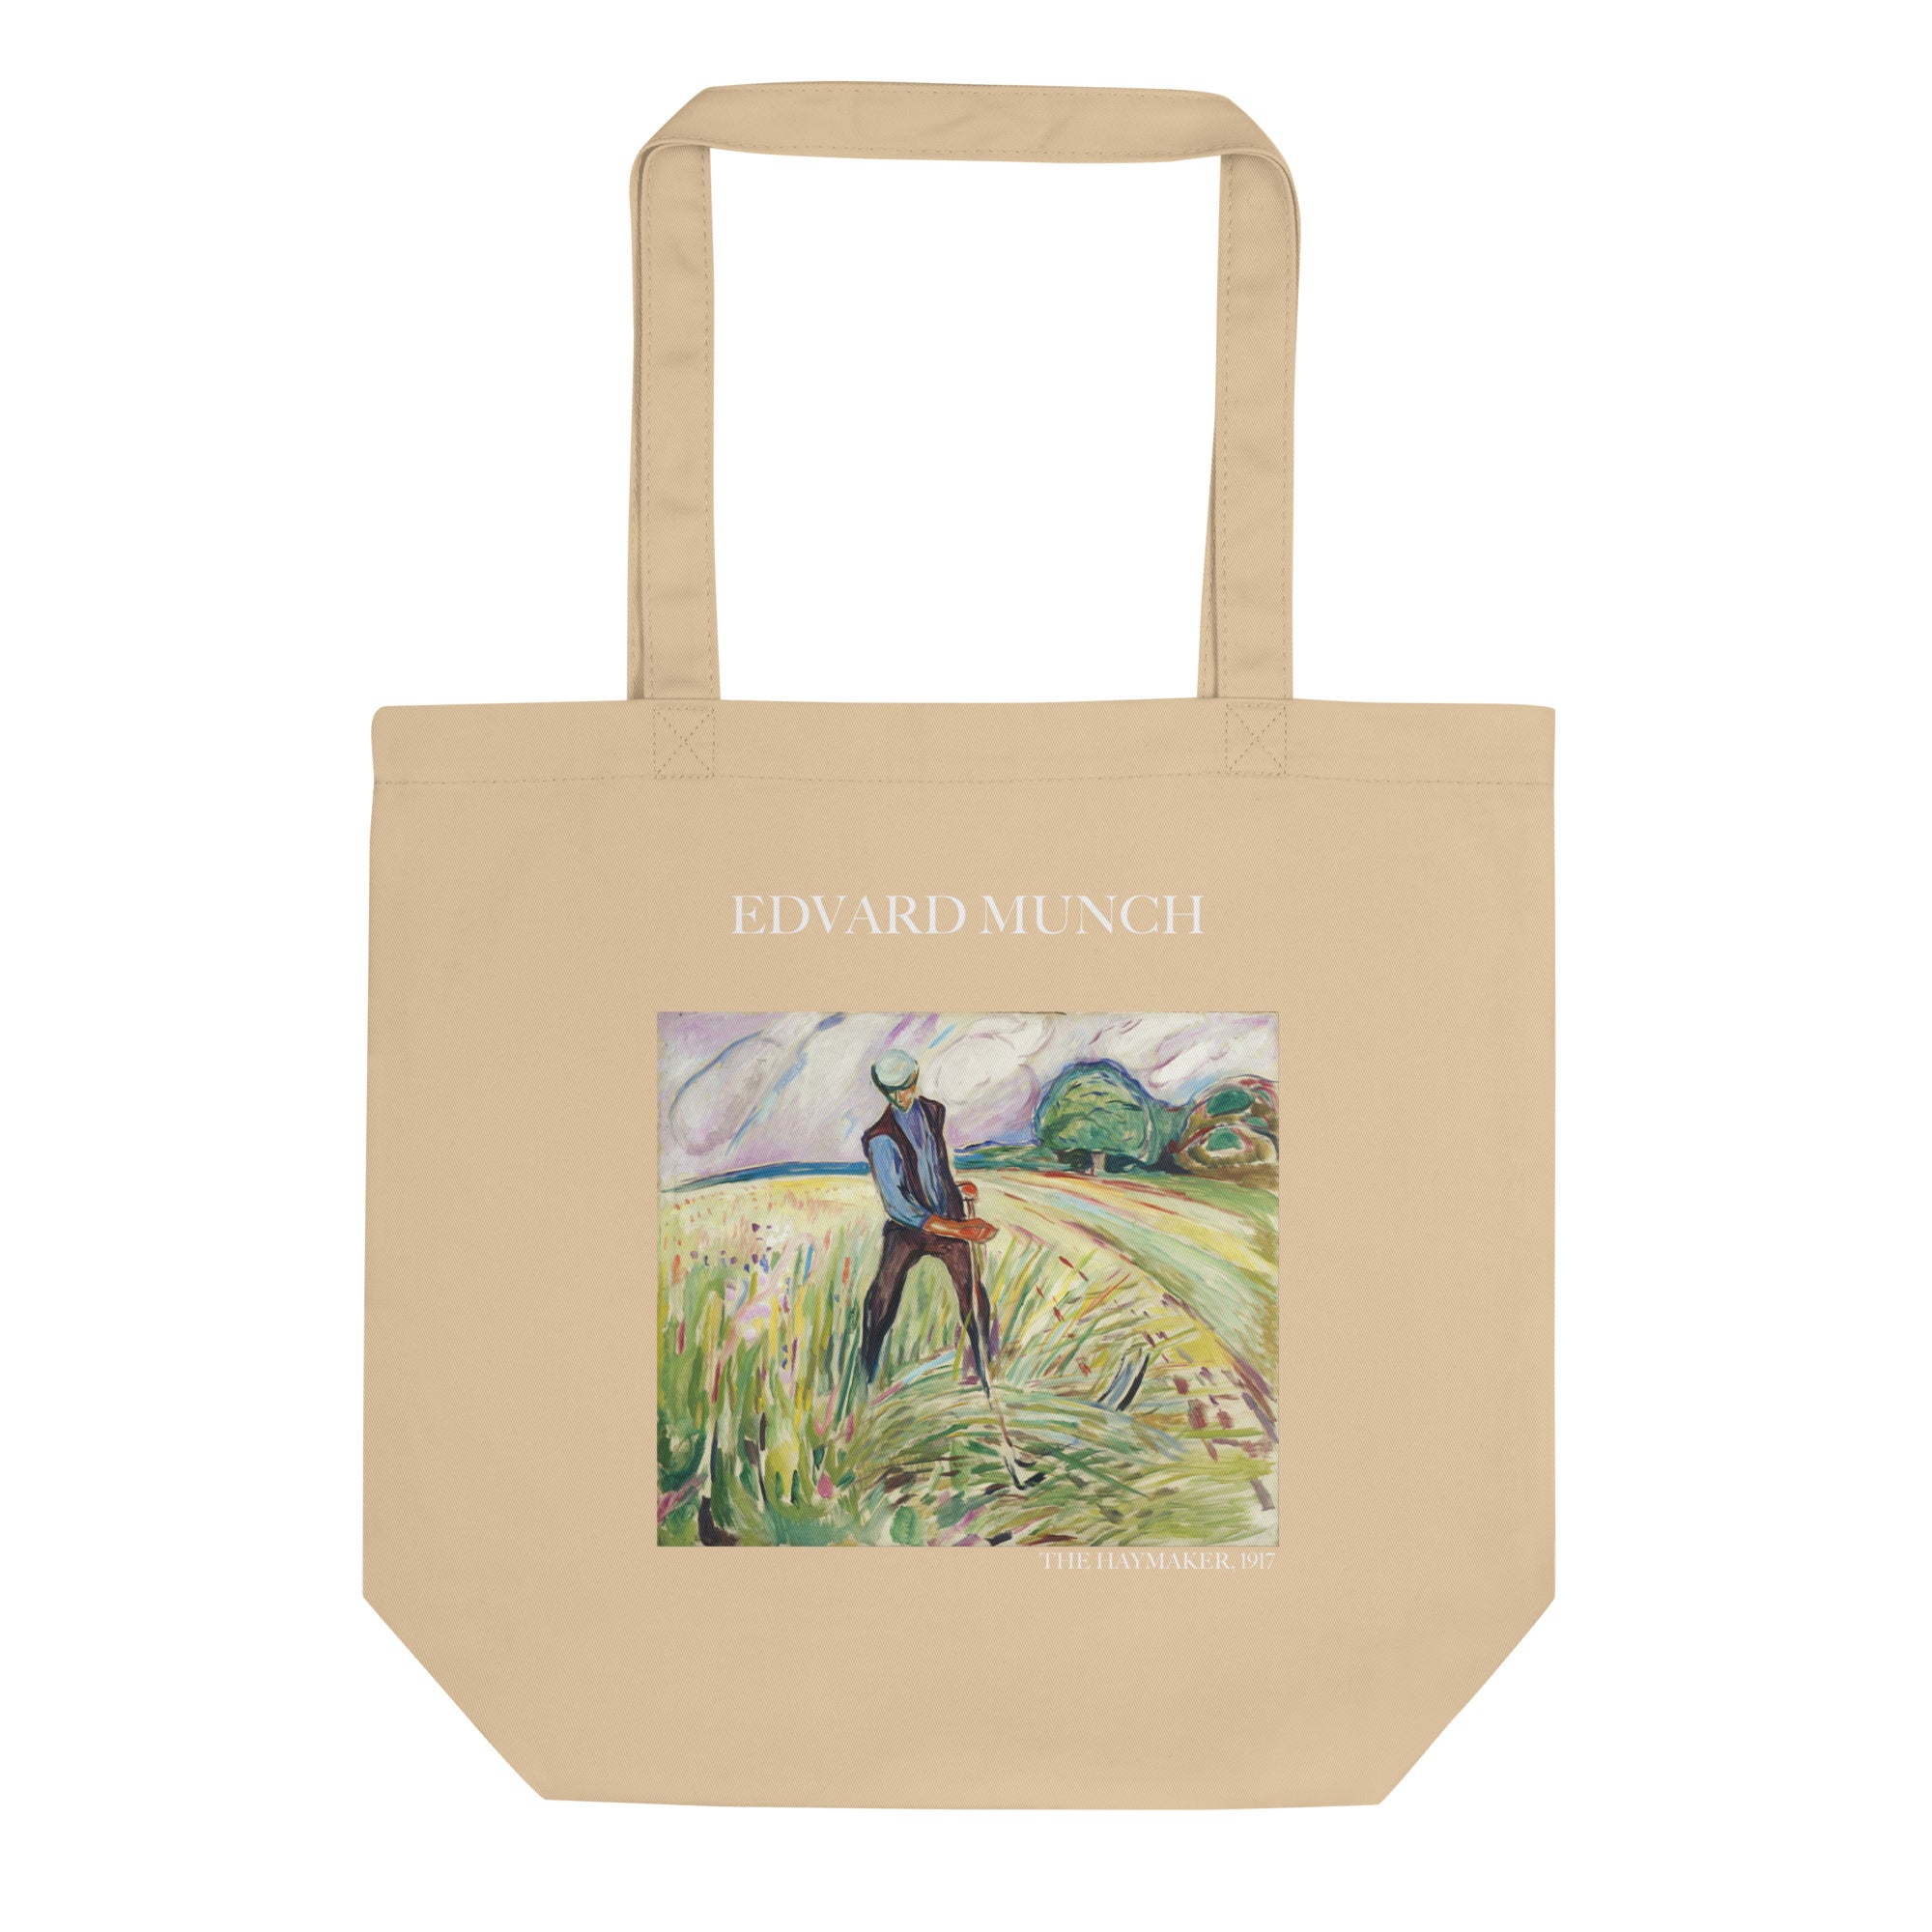 Edvard Munch 'The Haymaker' Famous Painting Totebag | Eco Friendly Art Tote Bag